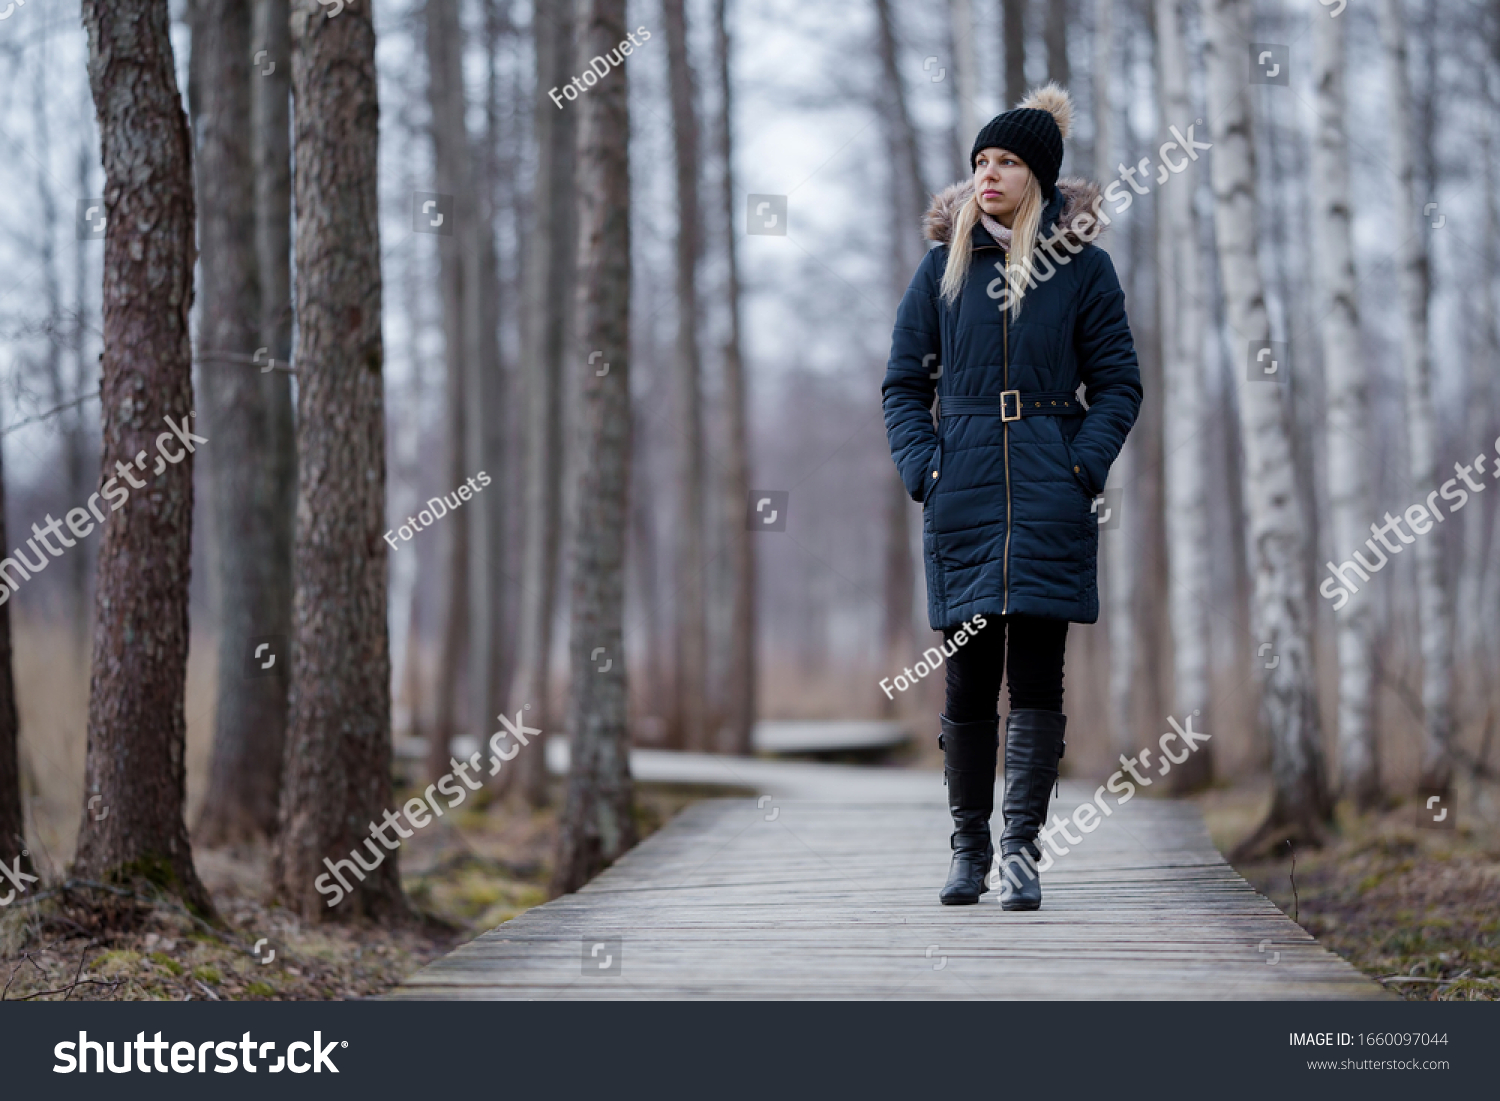 Young woman in dark warm clothes slowly walking on wooden trail at natural park. Cold overcast day. Spending time alone in nature. Peaceful atmosphere. Front view. 